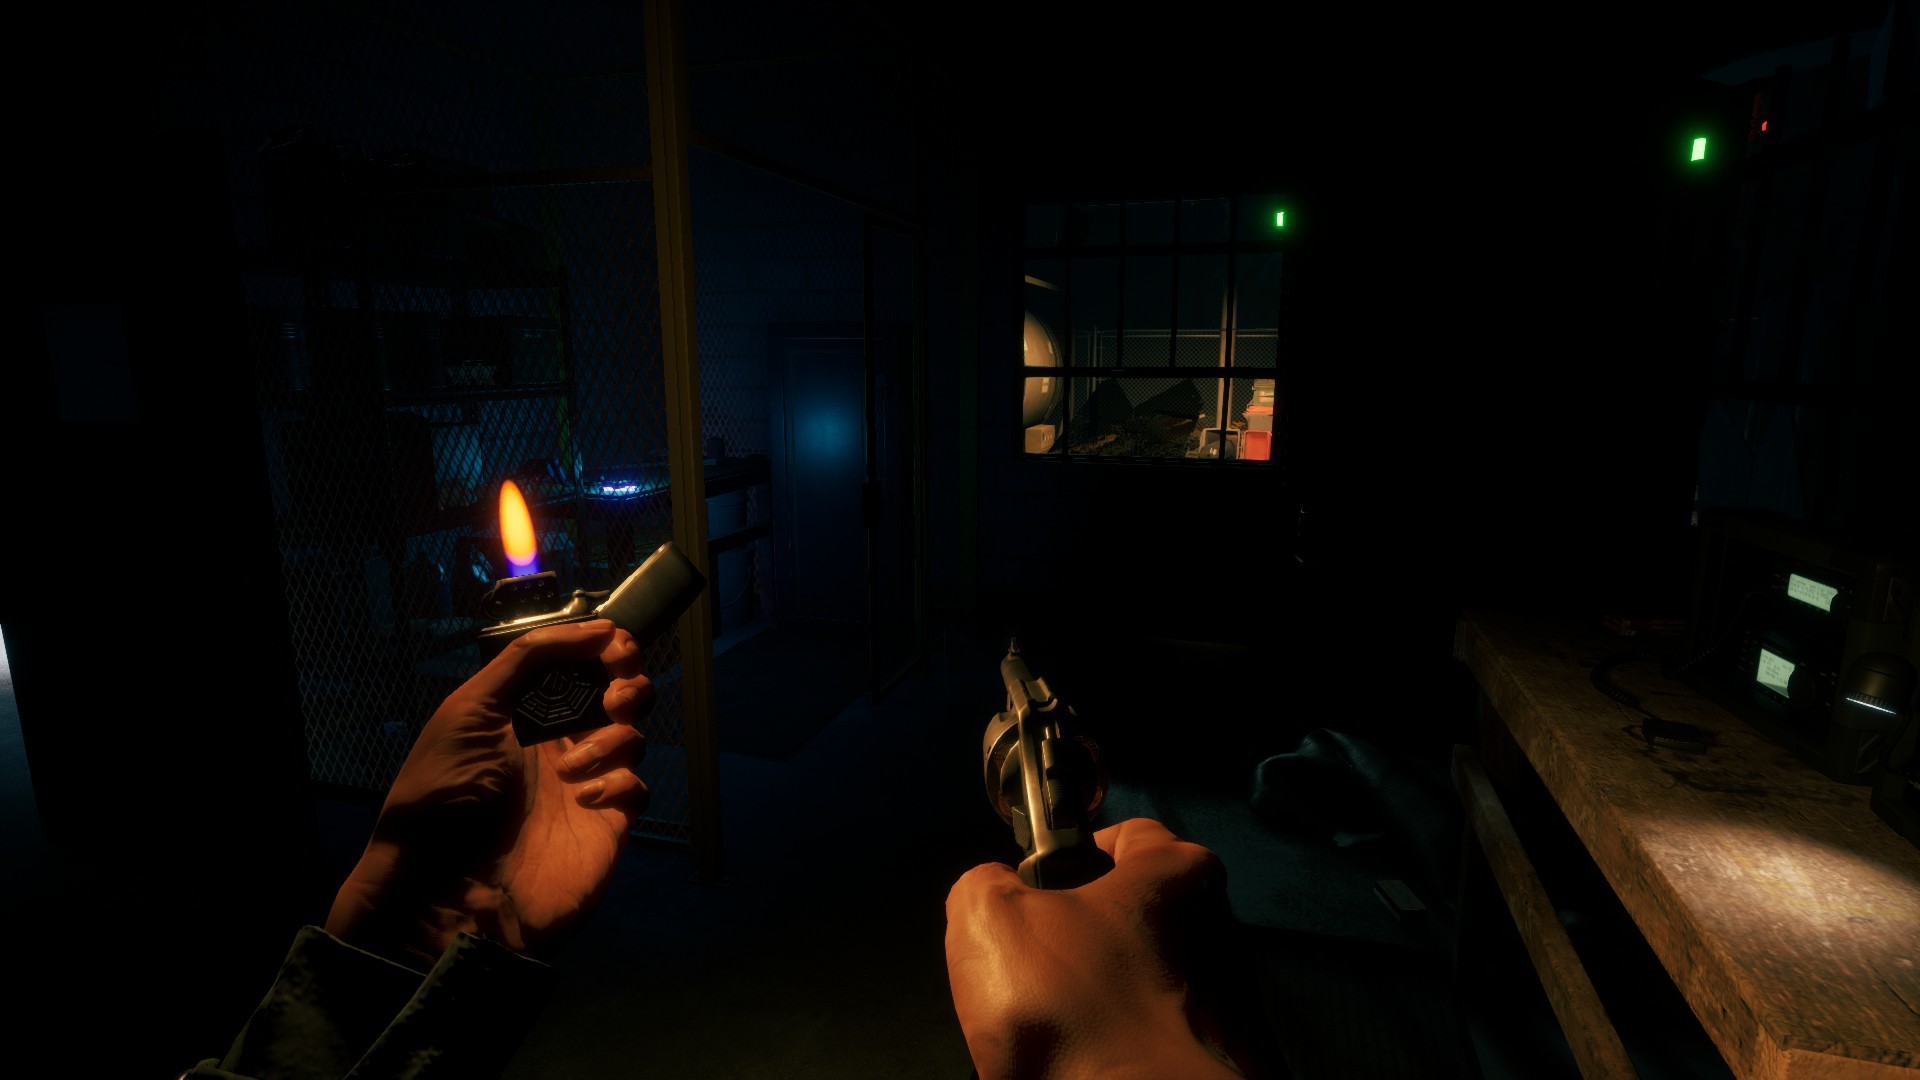 Image from zombie shooter game No More Room in Hell 2